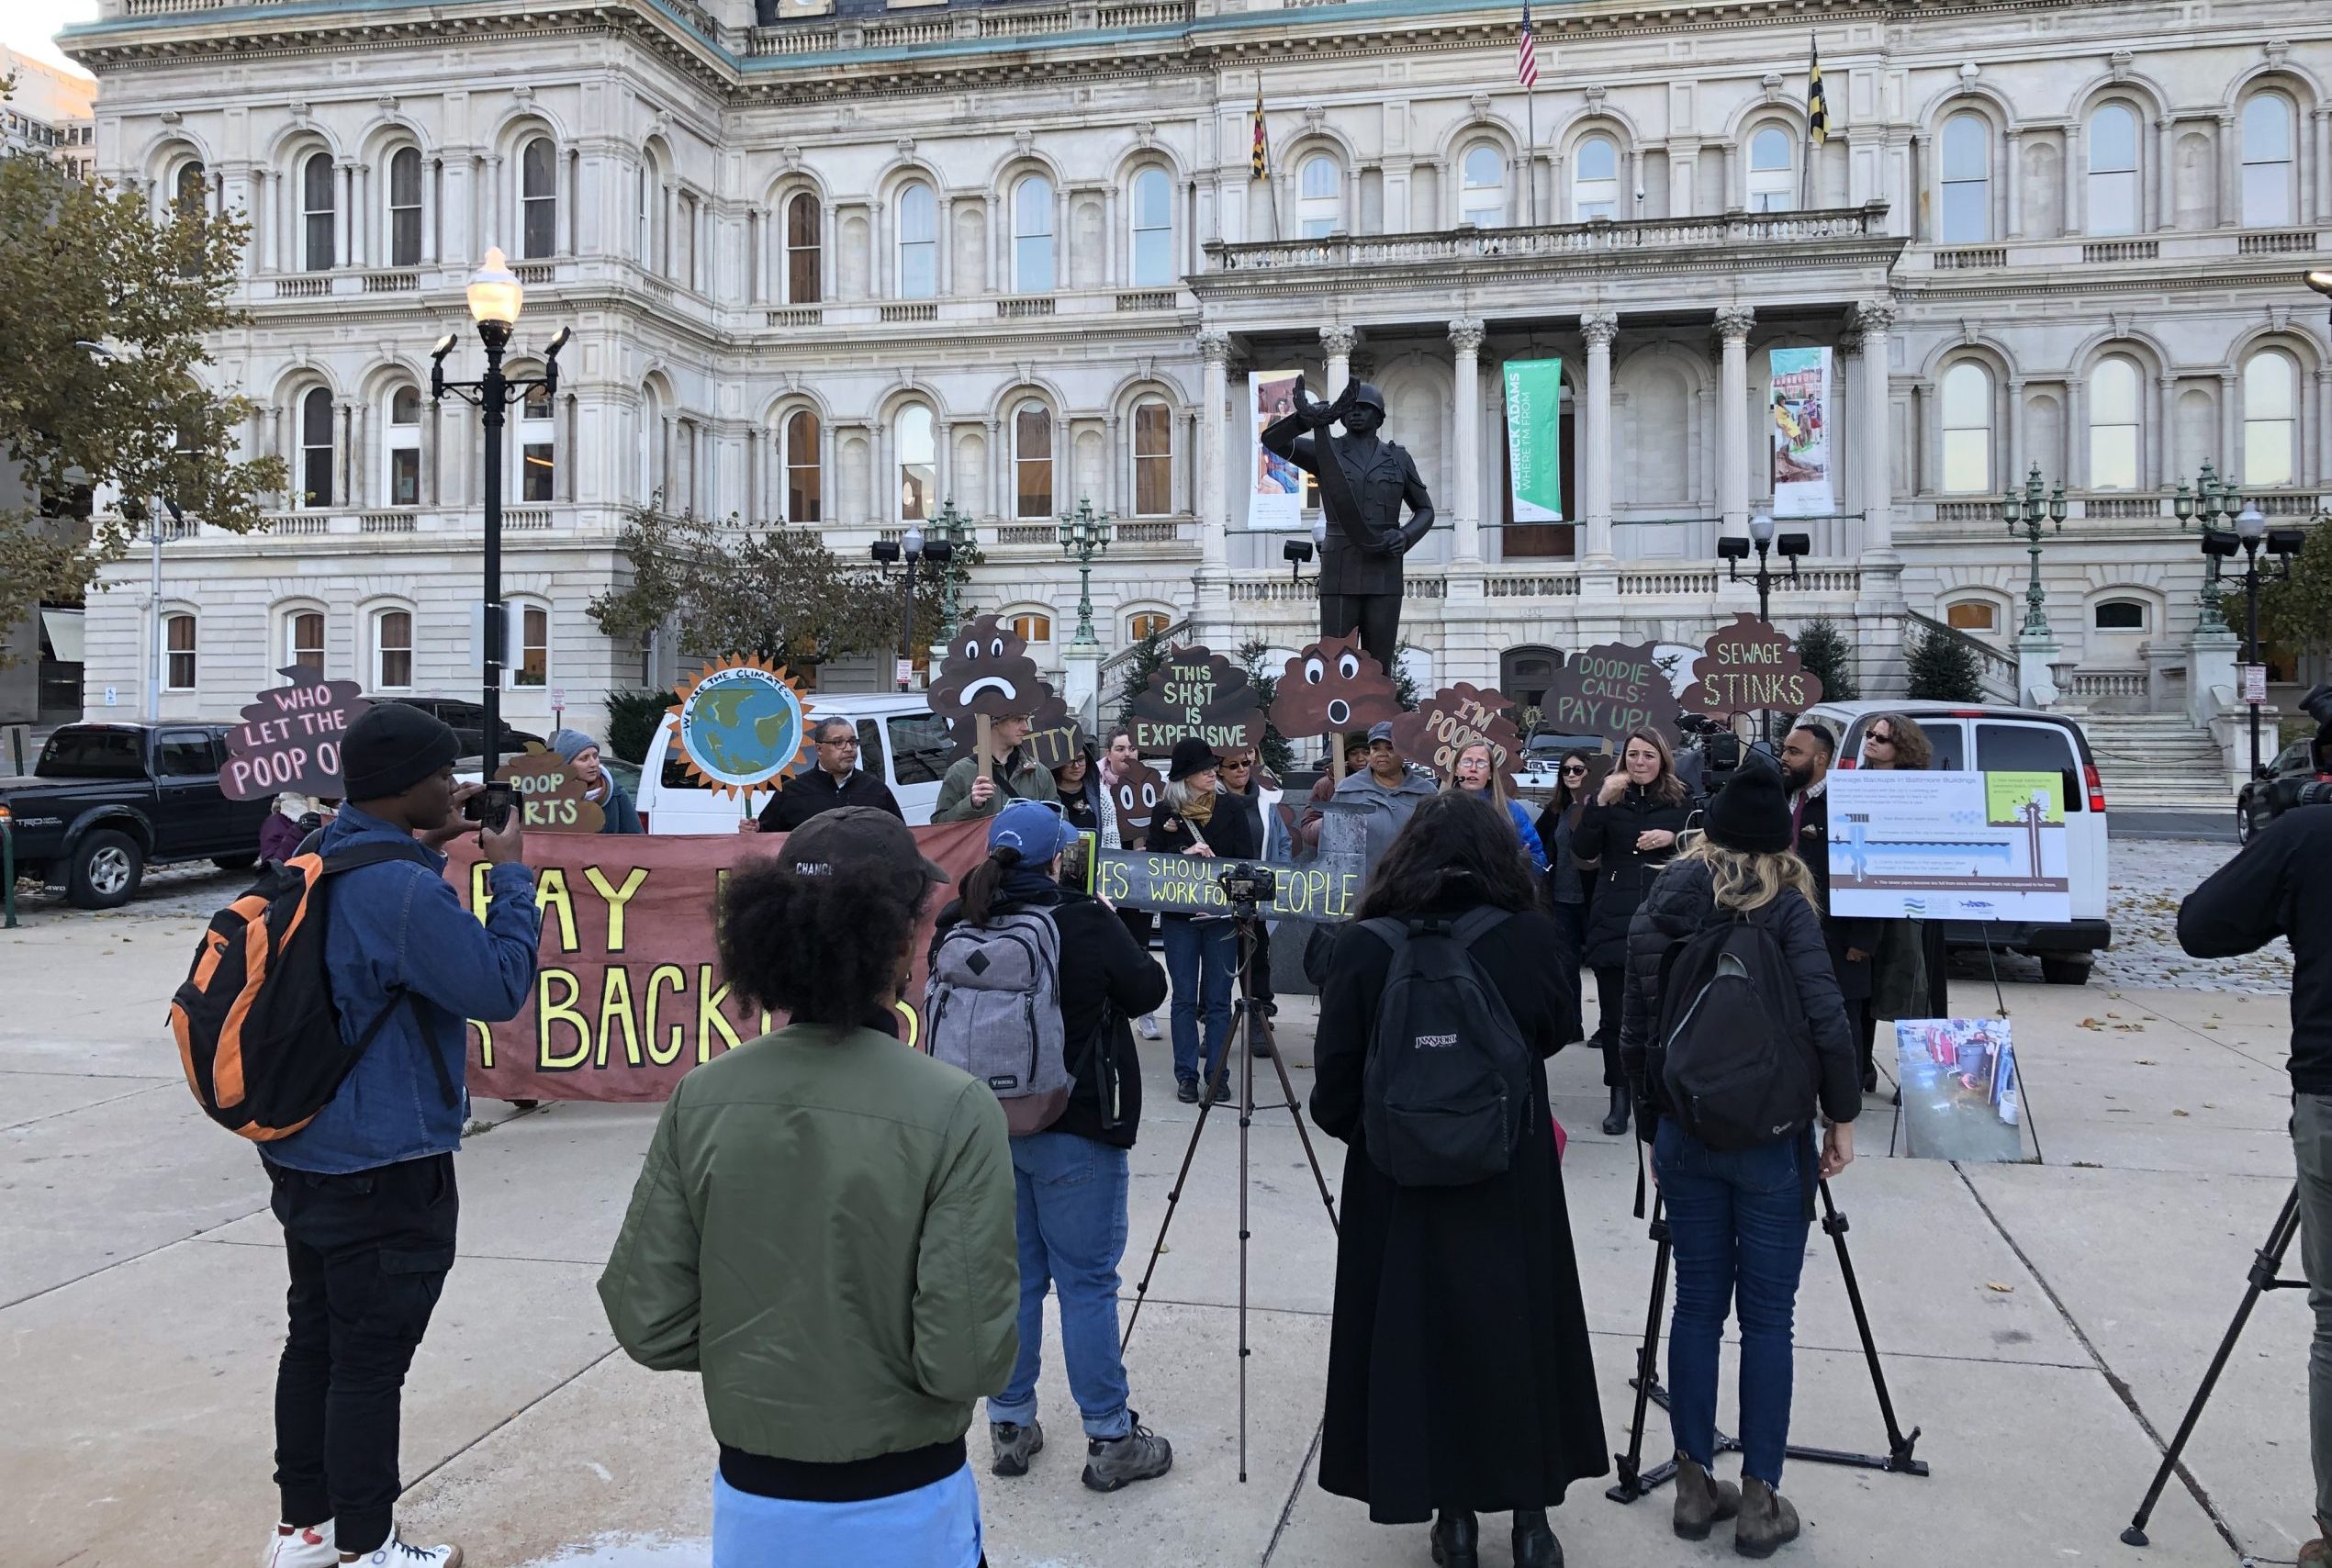 A group protests outside city hall in Baltimore, as news cameras look on.